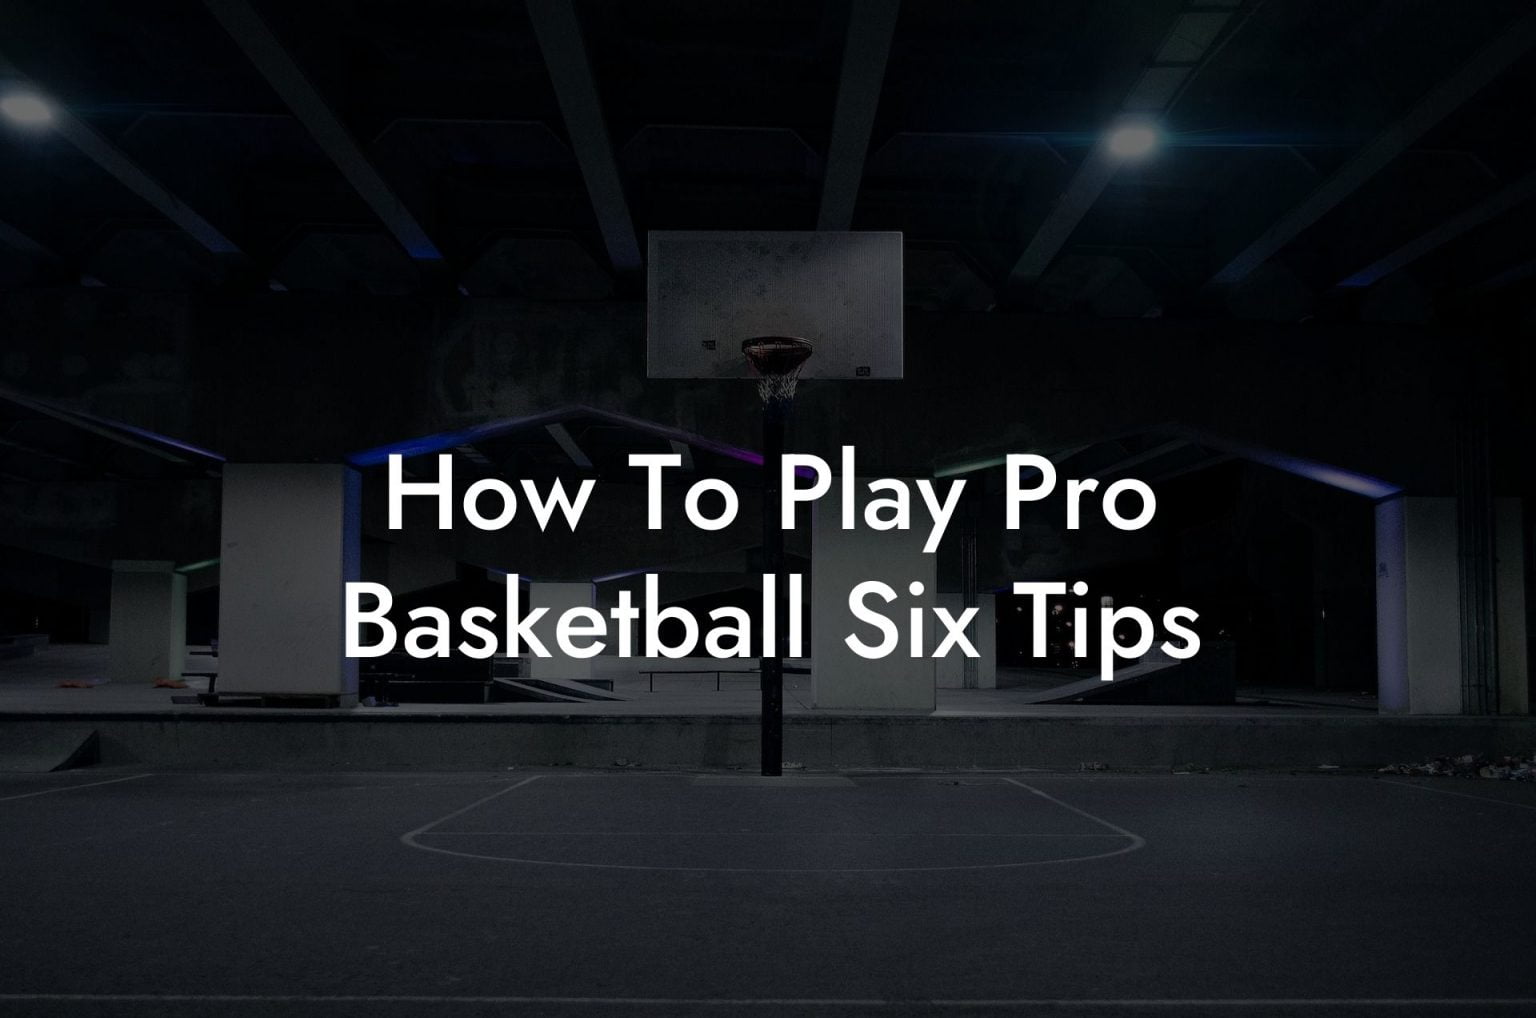 How To Play Pro Basketball Six Tips Triple Threat Tactics Everything Basketball